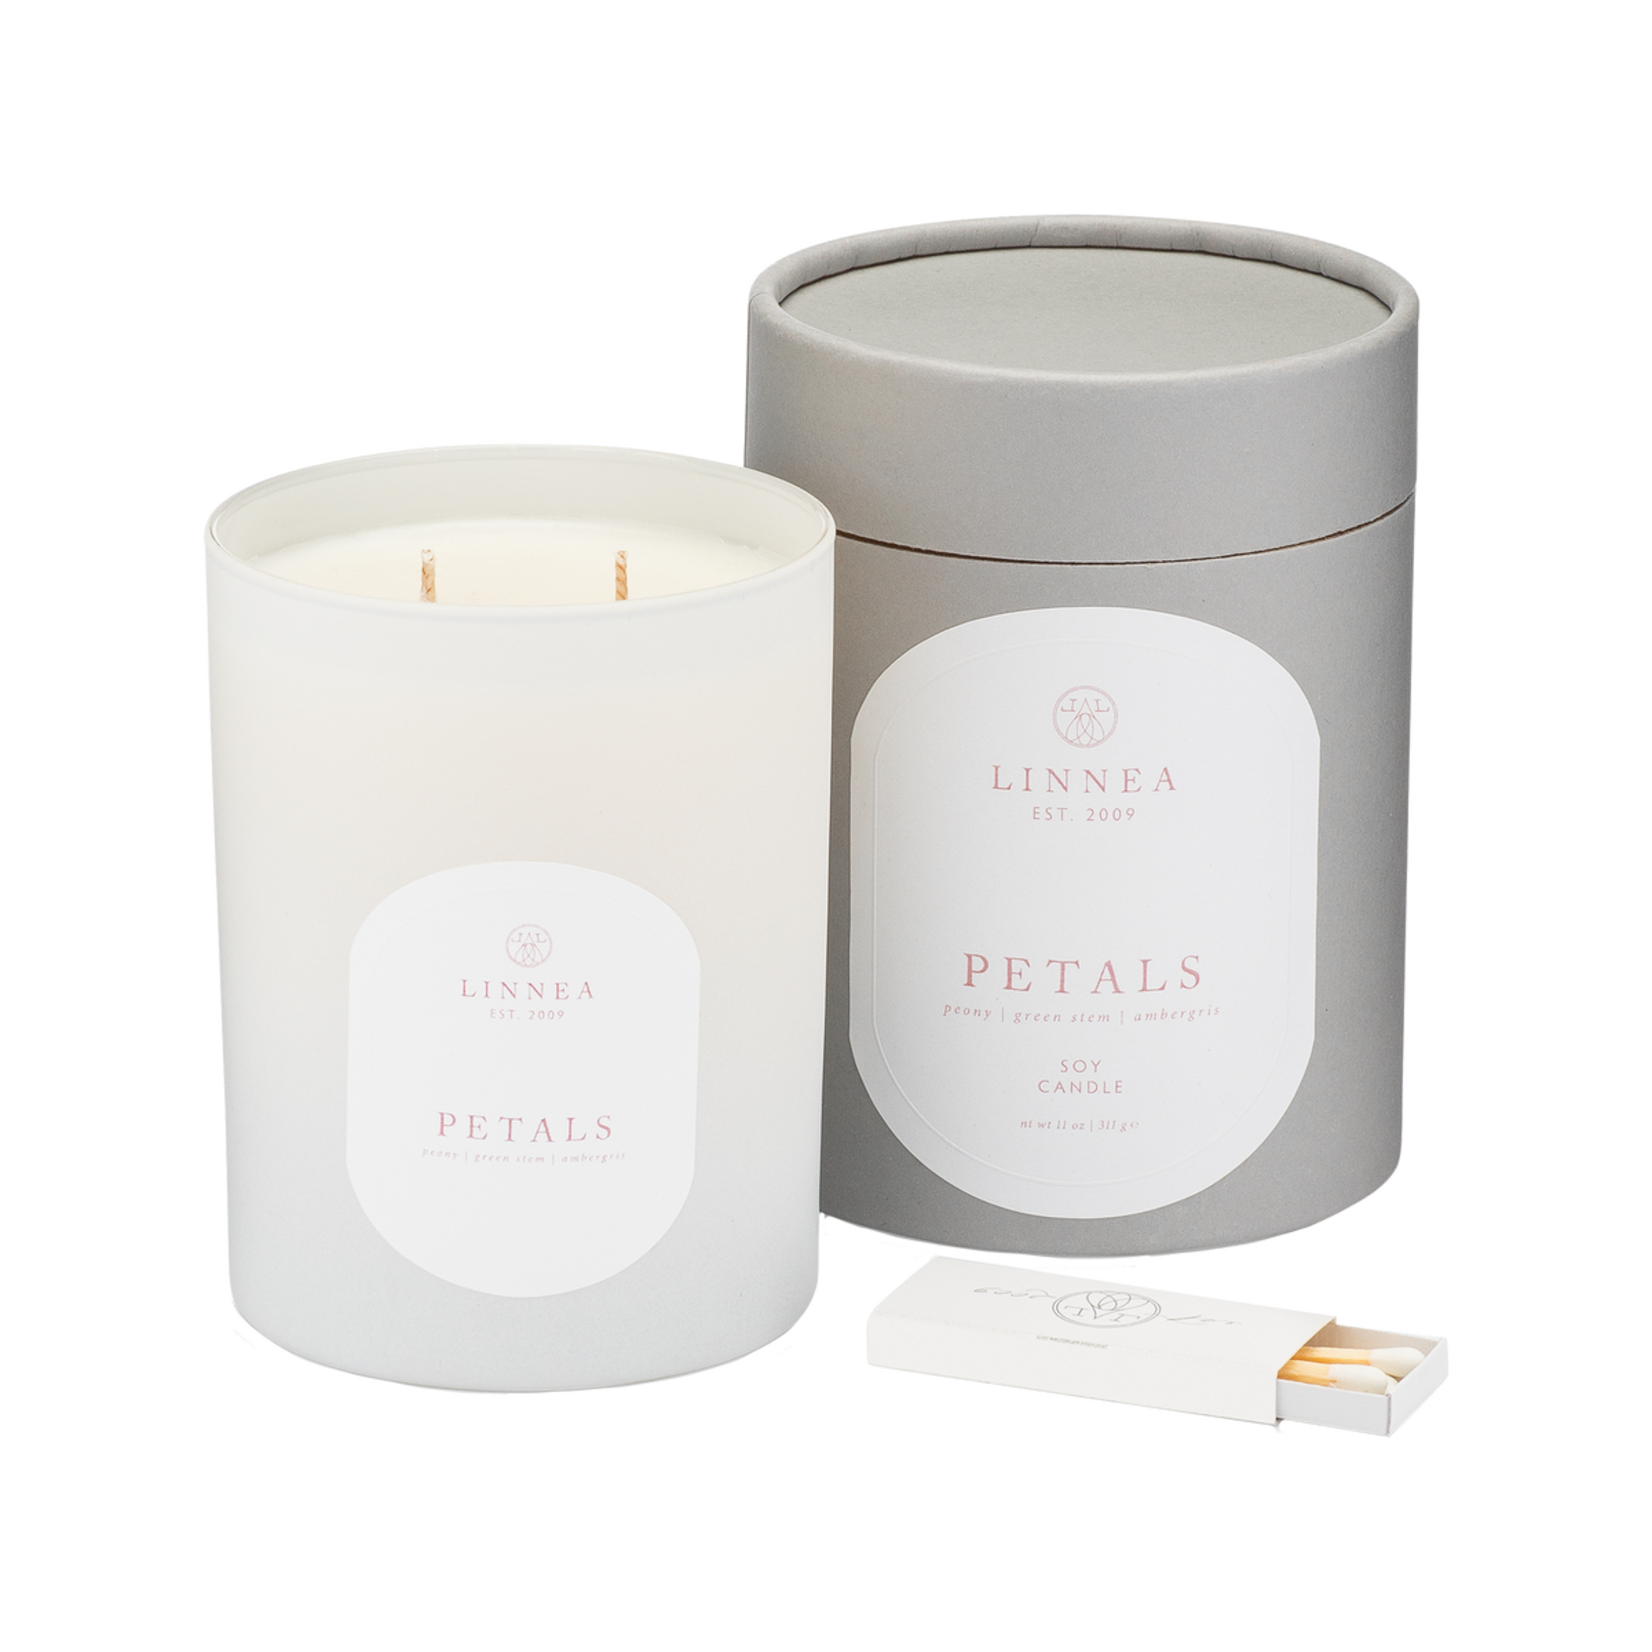 Linnea Petals Two-Wick Candle